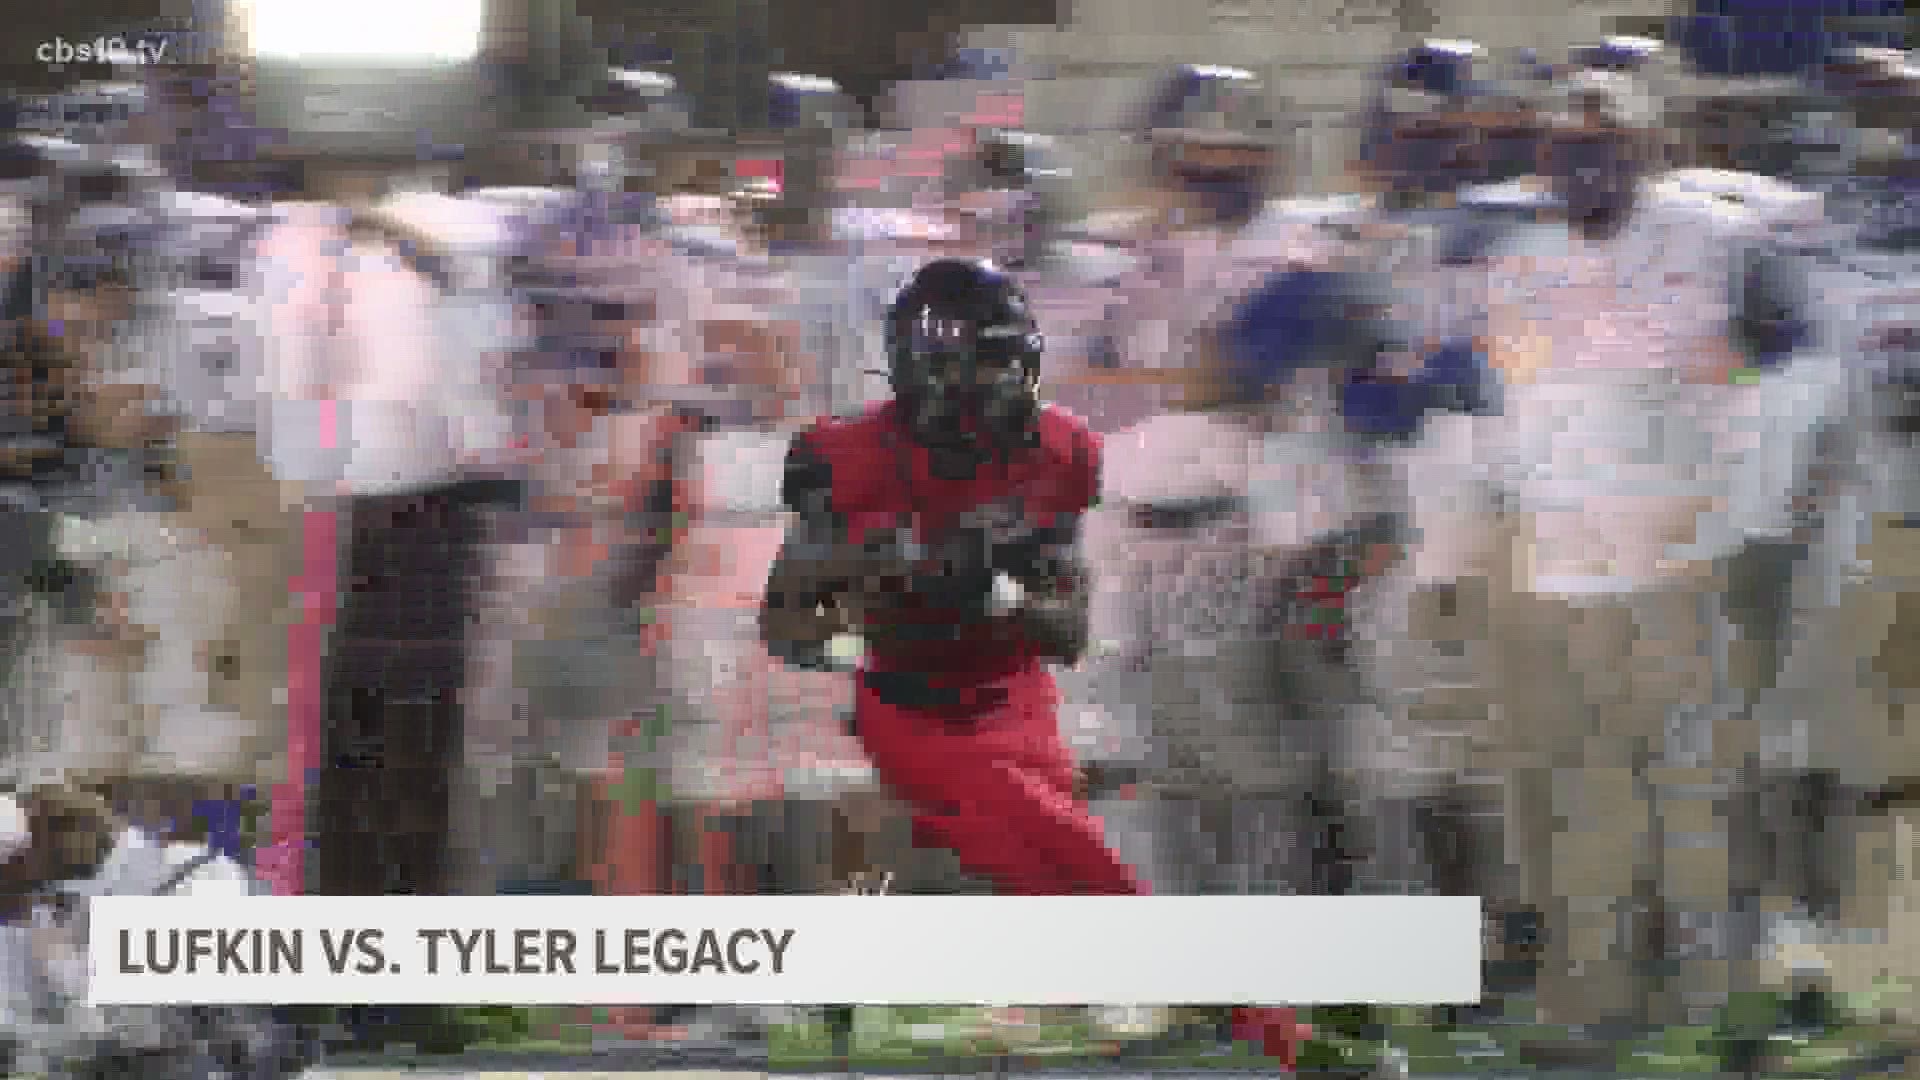 The Lufkin Panthers traveled to Tyler to take on the Tyler Legacy Red Raiders in the first week of play of the Texas high school football season for 5A/6A teams.